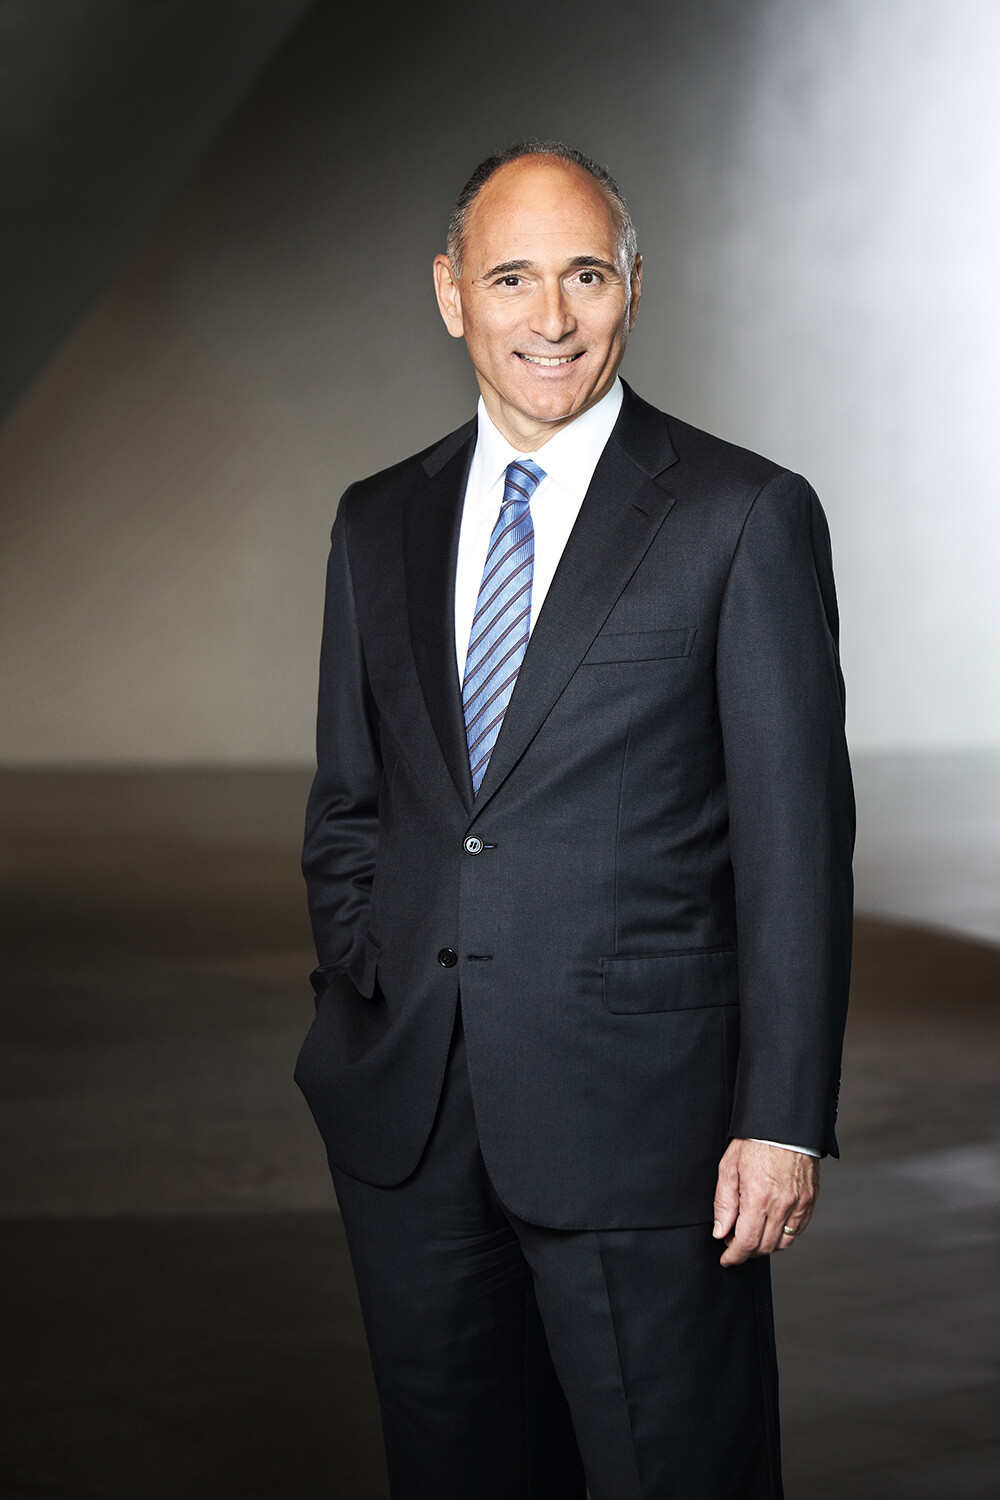 Joseph Jimenez was a former CEO of the Swiss pharmaceutical company Novartis from 2010 till 2018. He is on the board of directors of General Motors GM